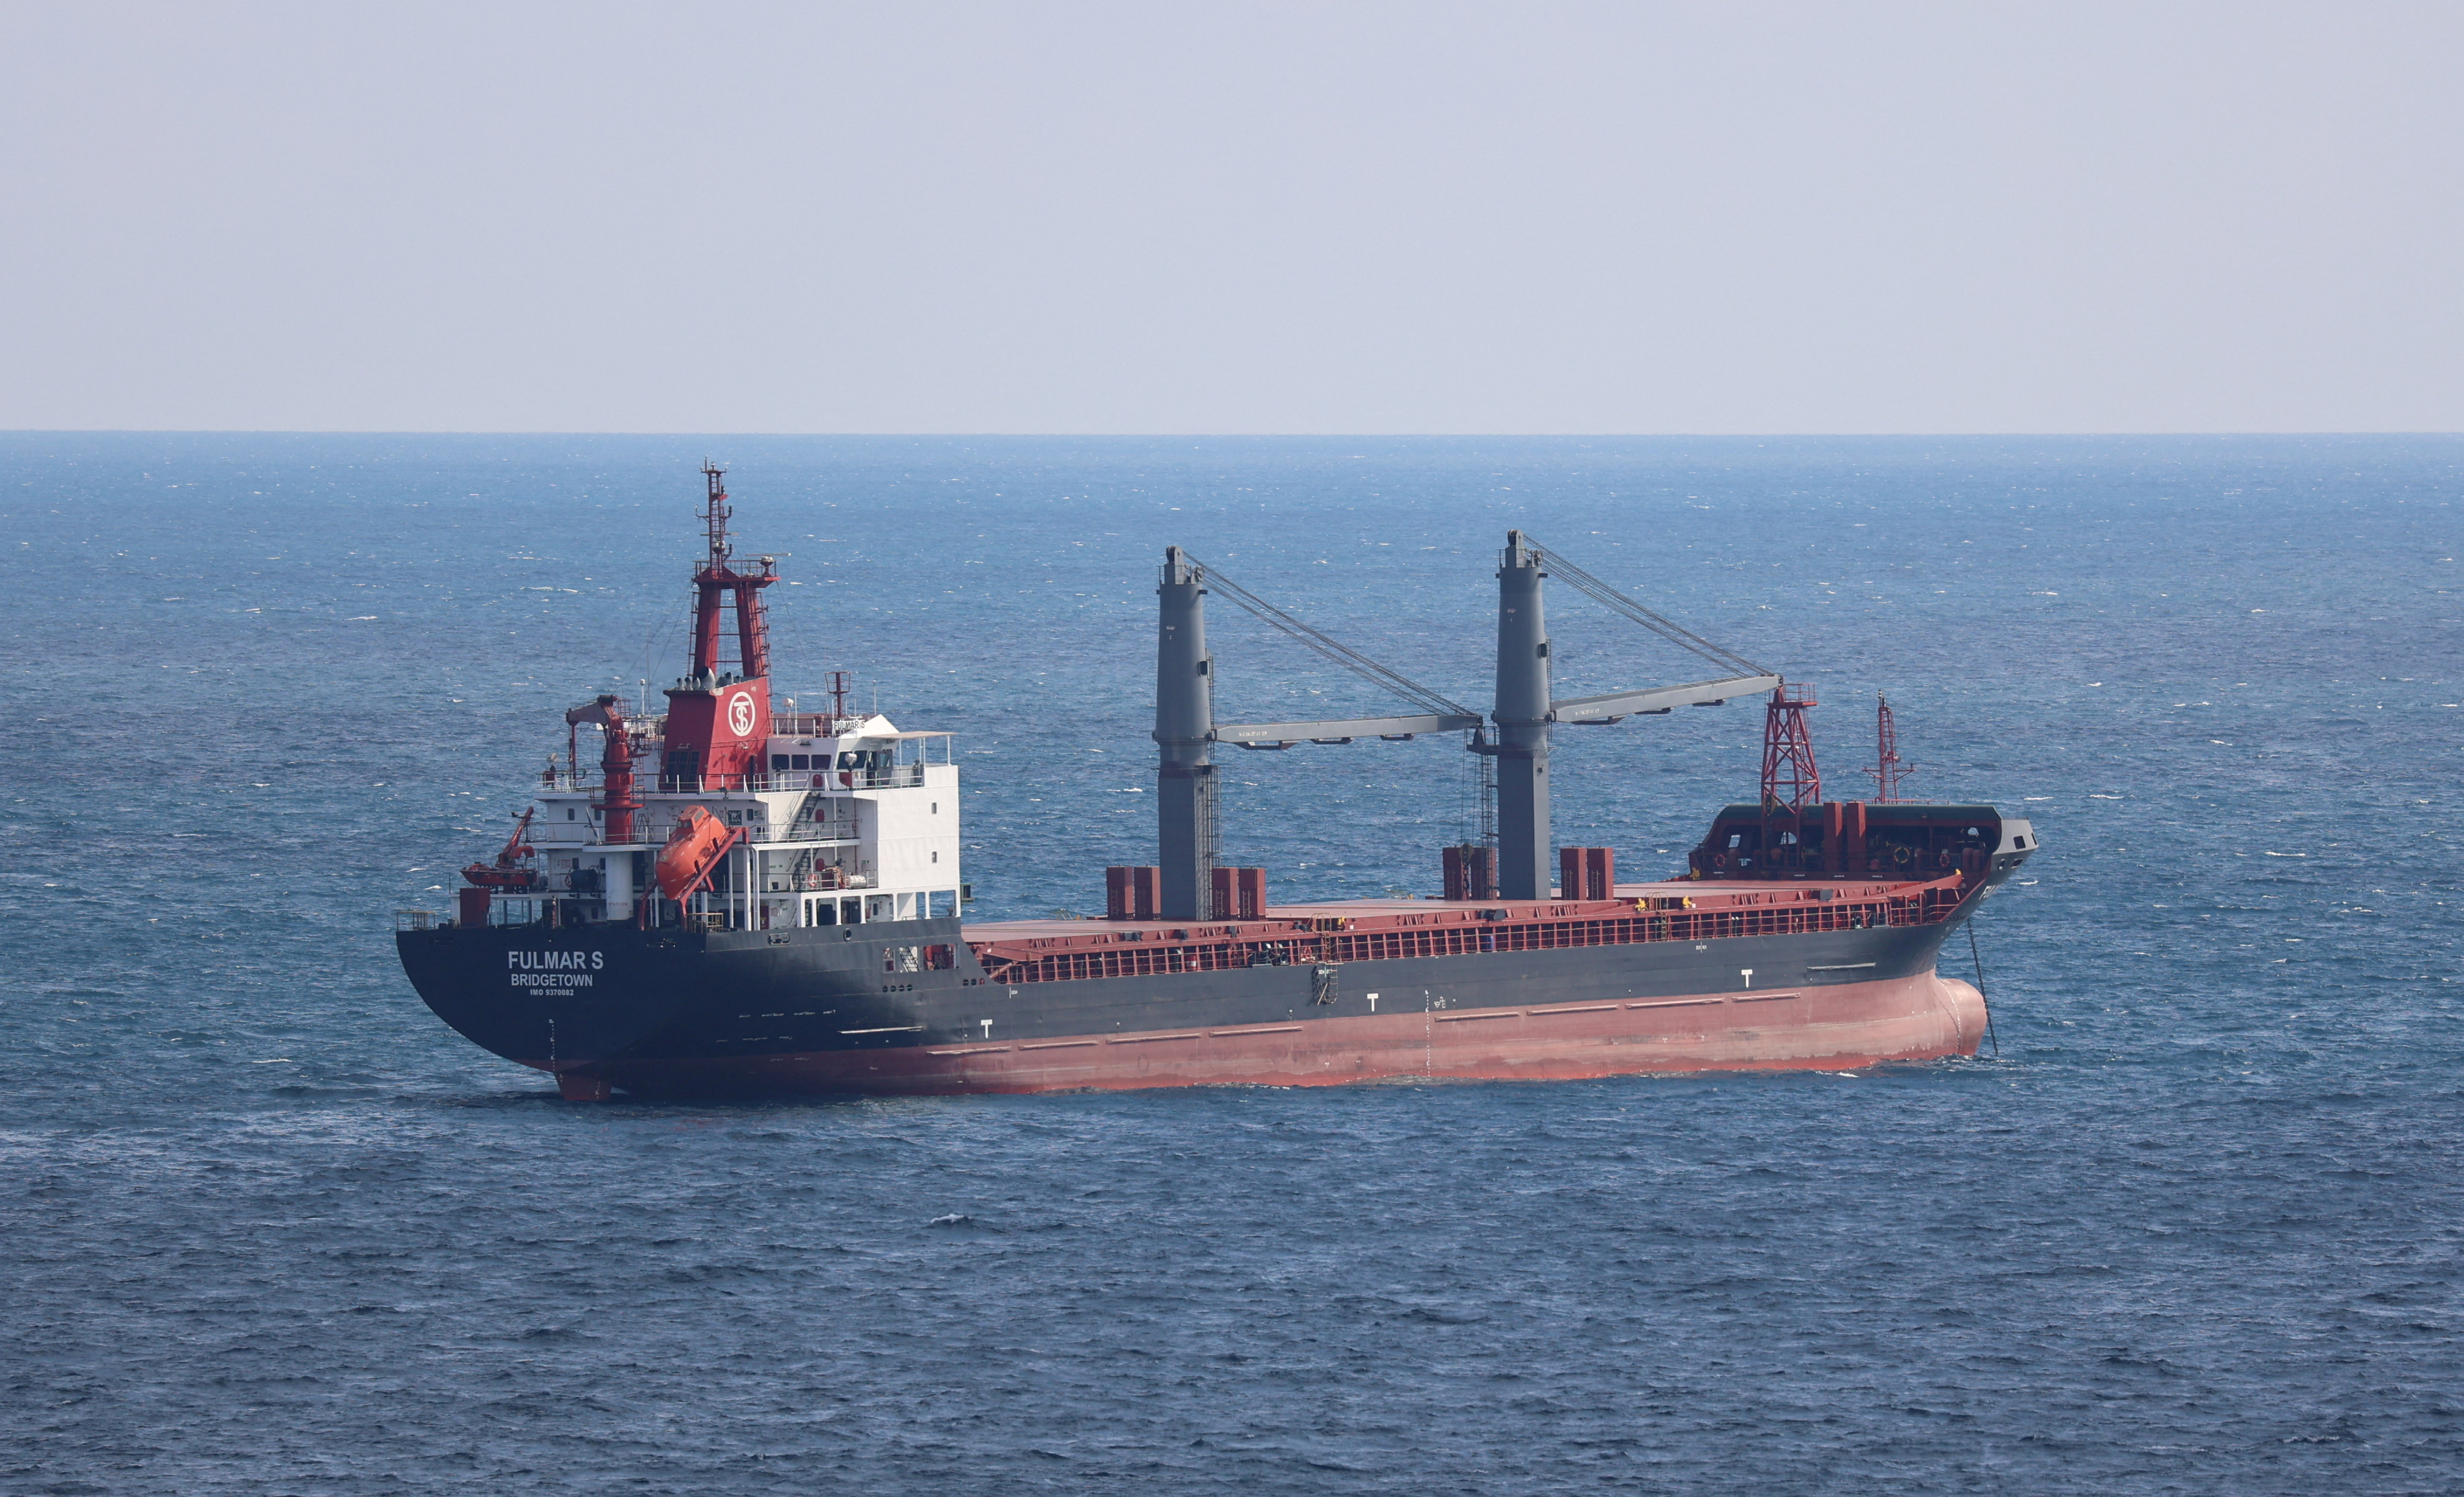 Barbados-flagged general cargo ship Fulmar S is pictured in the Black Sea, north of Istanbul's Bosphorus Strait